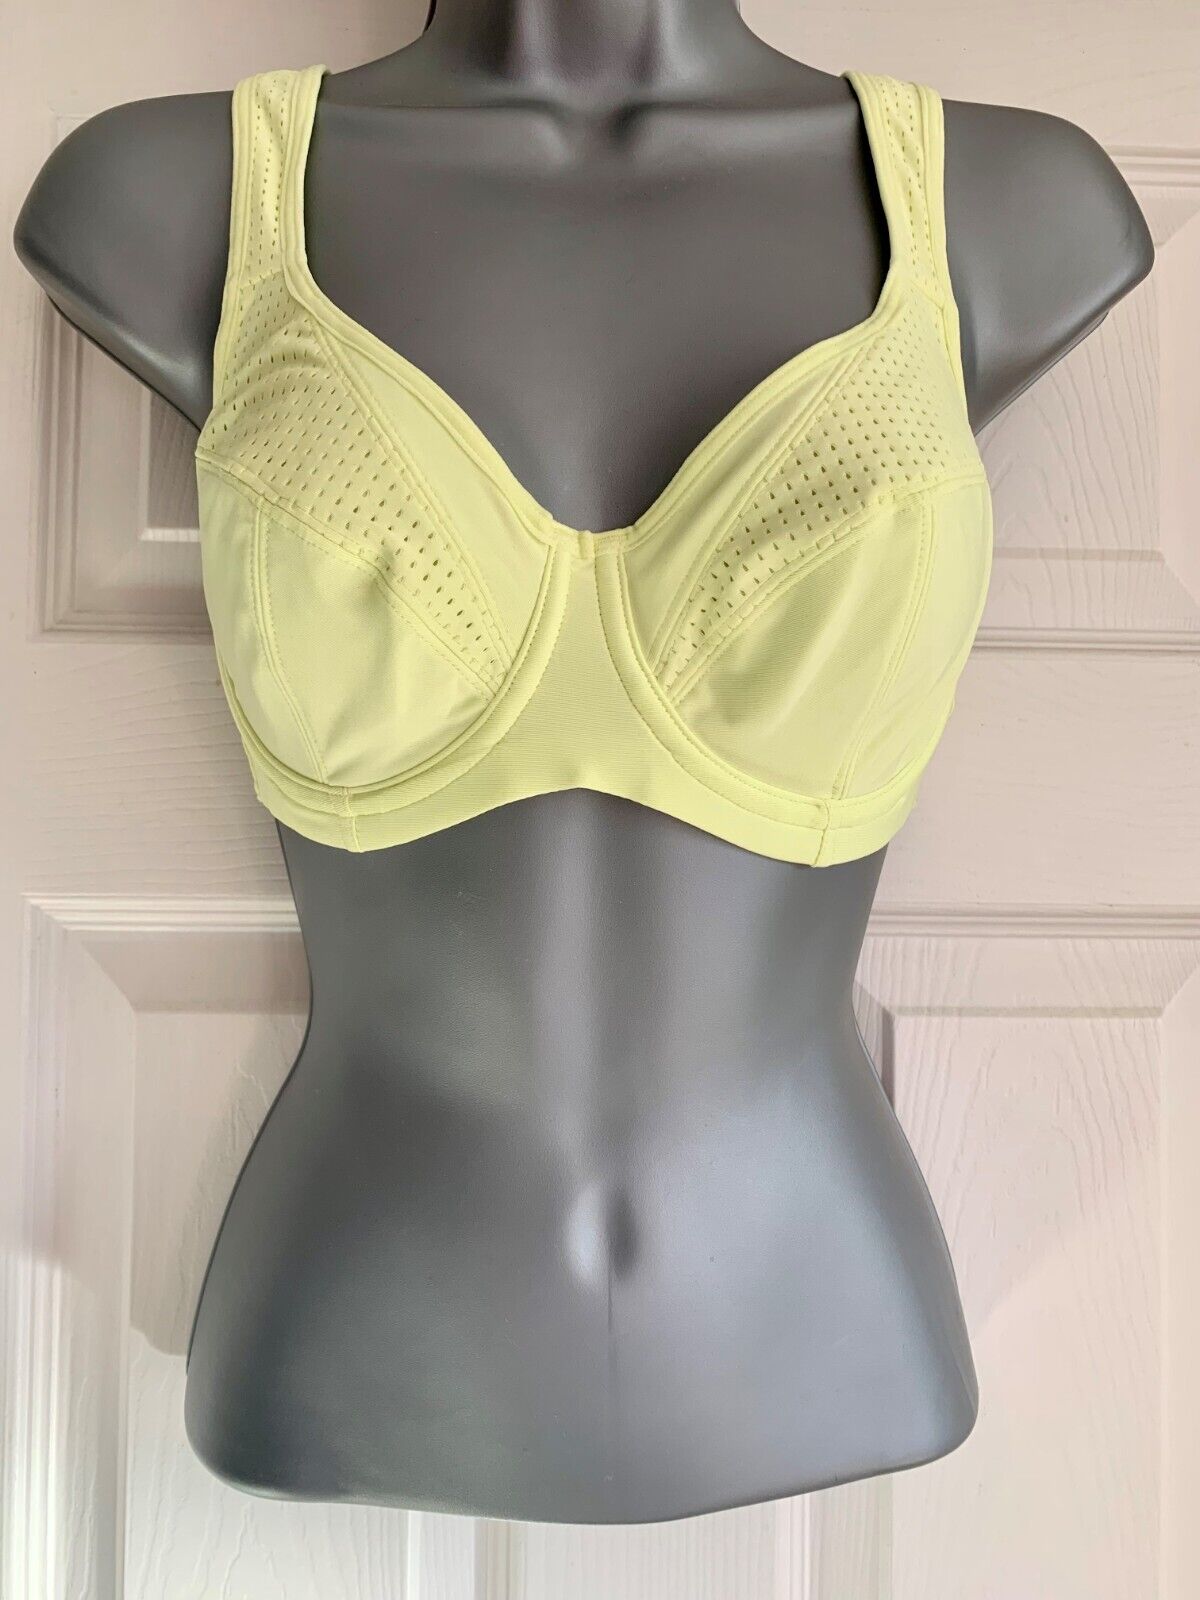 EX M*S Lime High Impact Underwired Sports Bra 34C, 34G, 38A, 40A, 40D, 40H, 42A